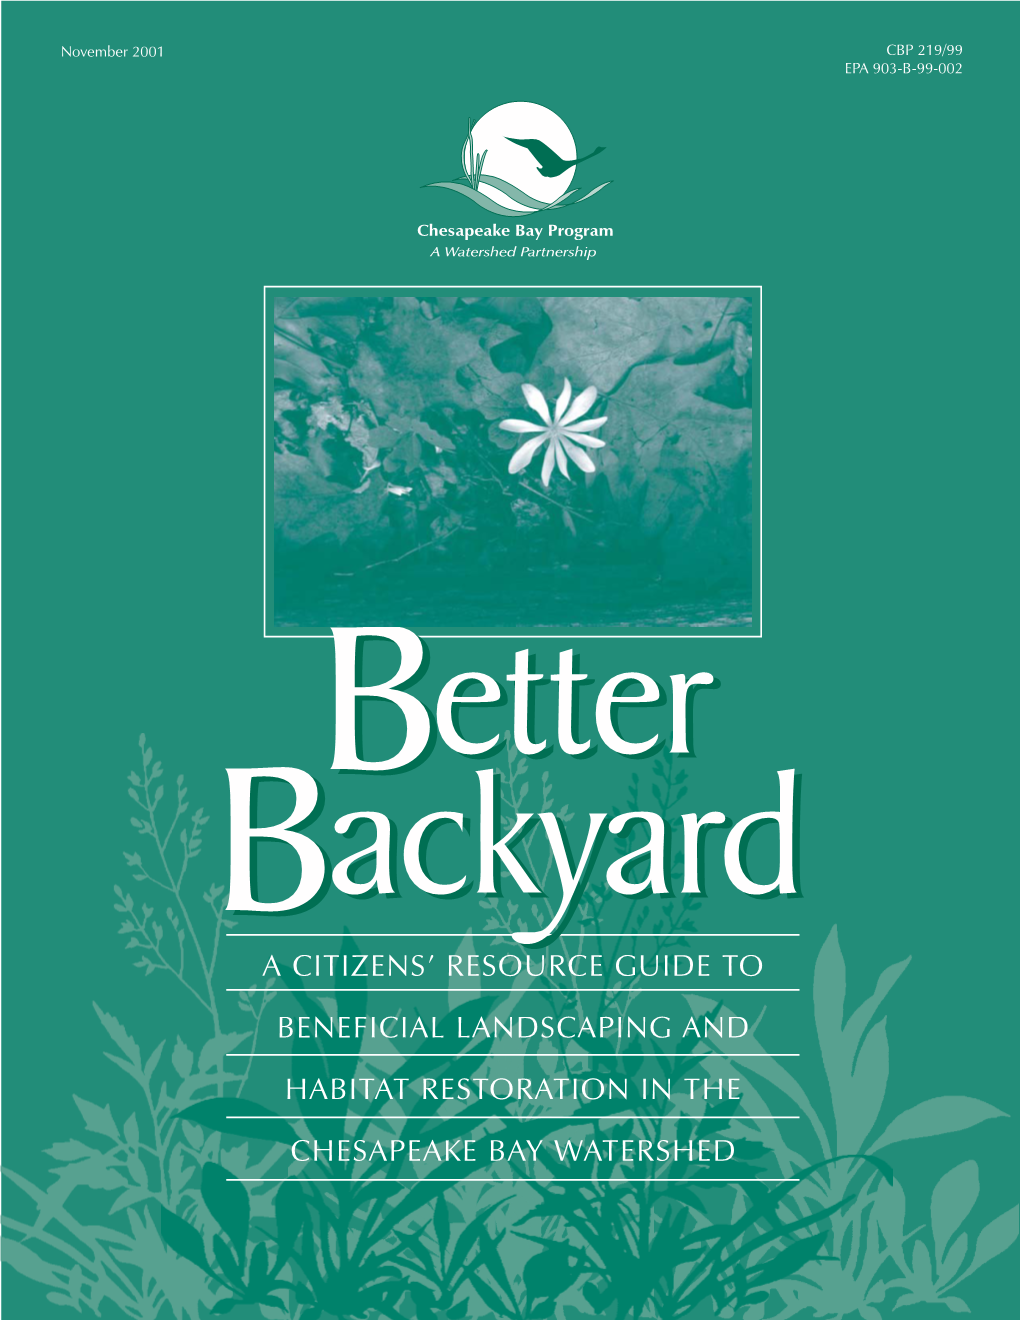 BETTER BACKYARD a Citizens’ Resource Guide to Beneficial Landscaping and Habitat Restoration in the Chesapeake Bay Watershed